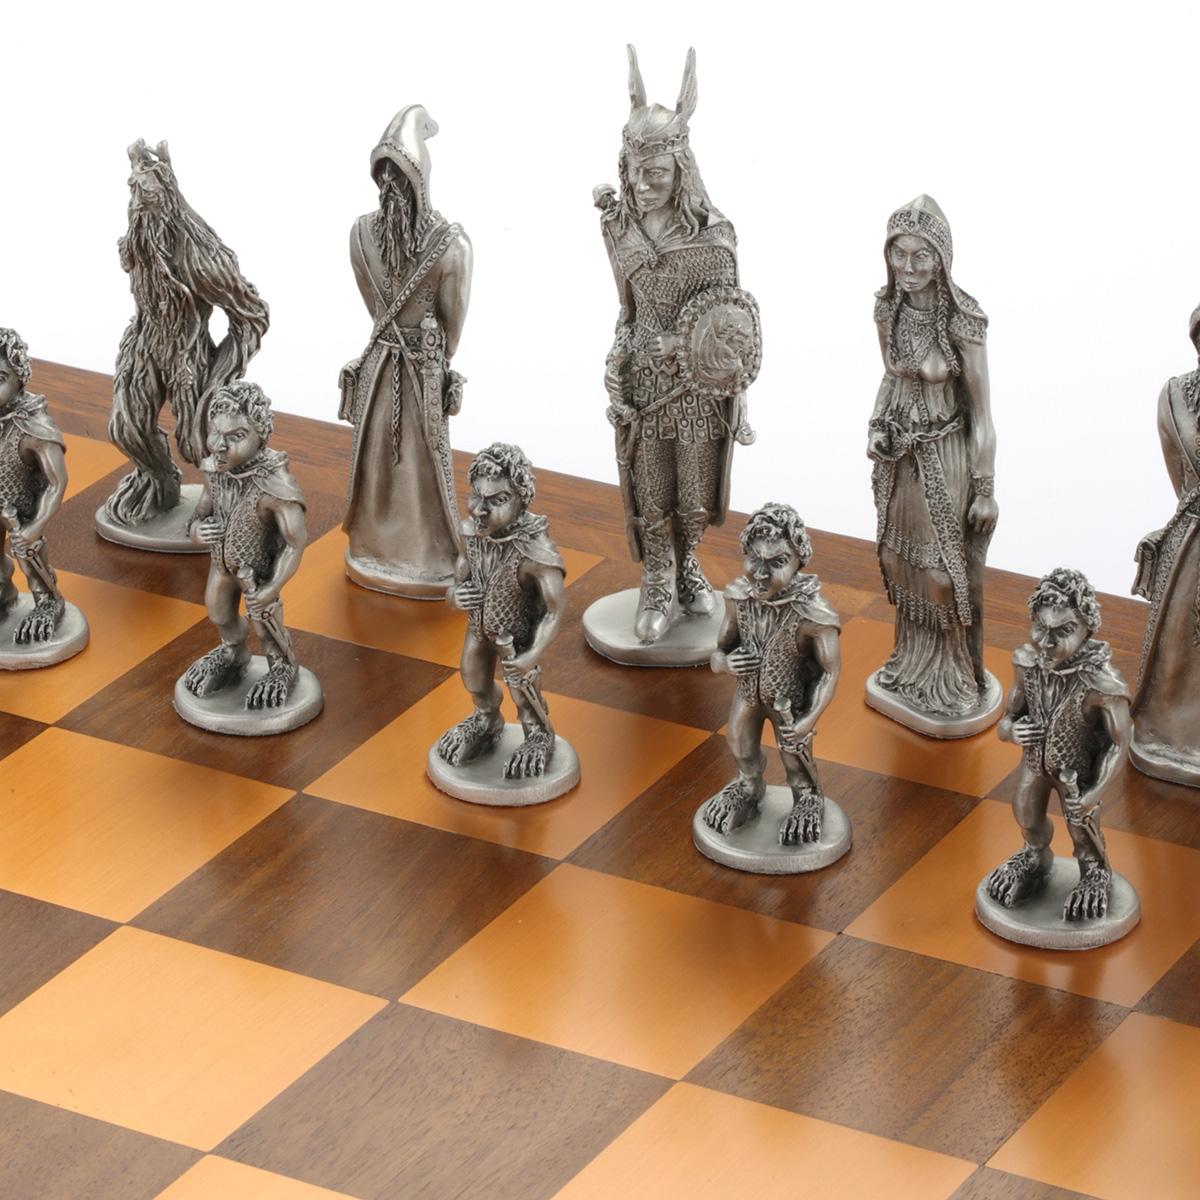 War of the Rings™ Chess Set